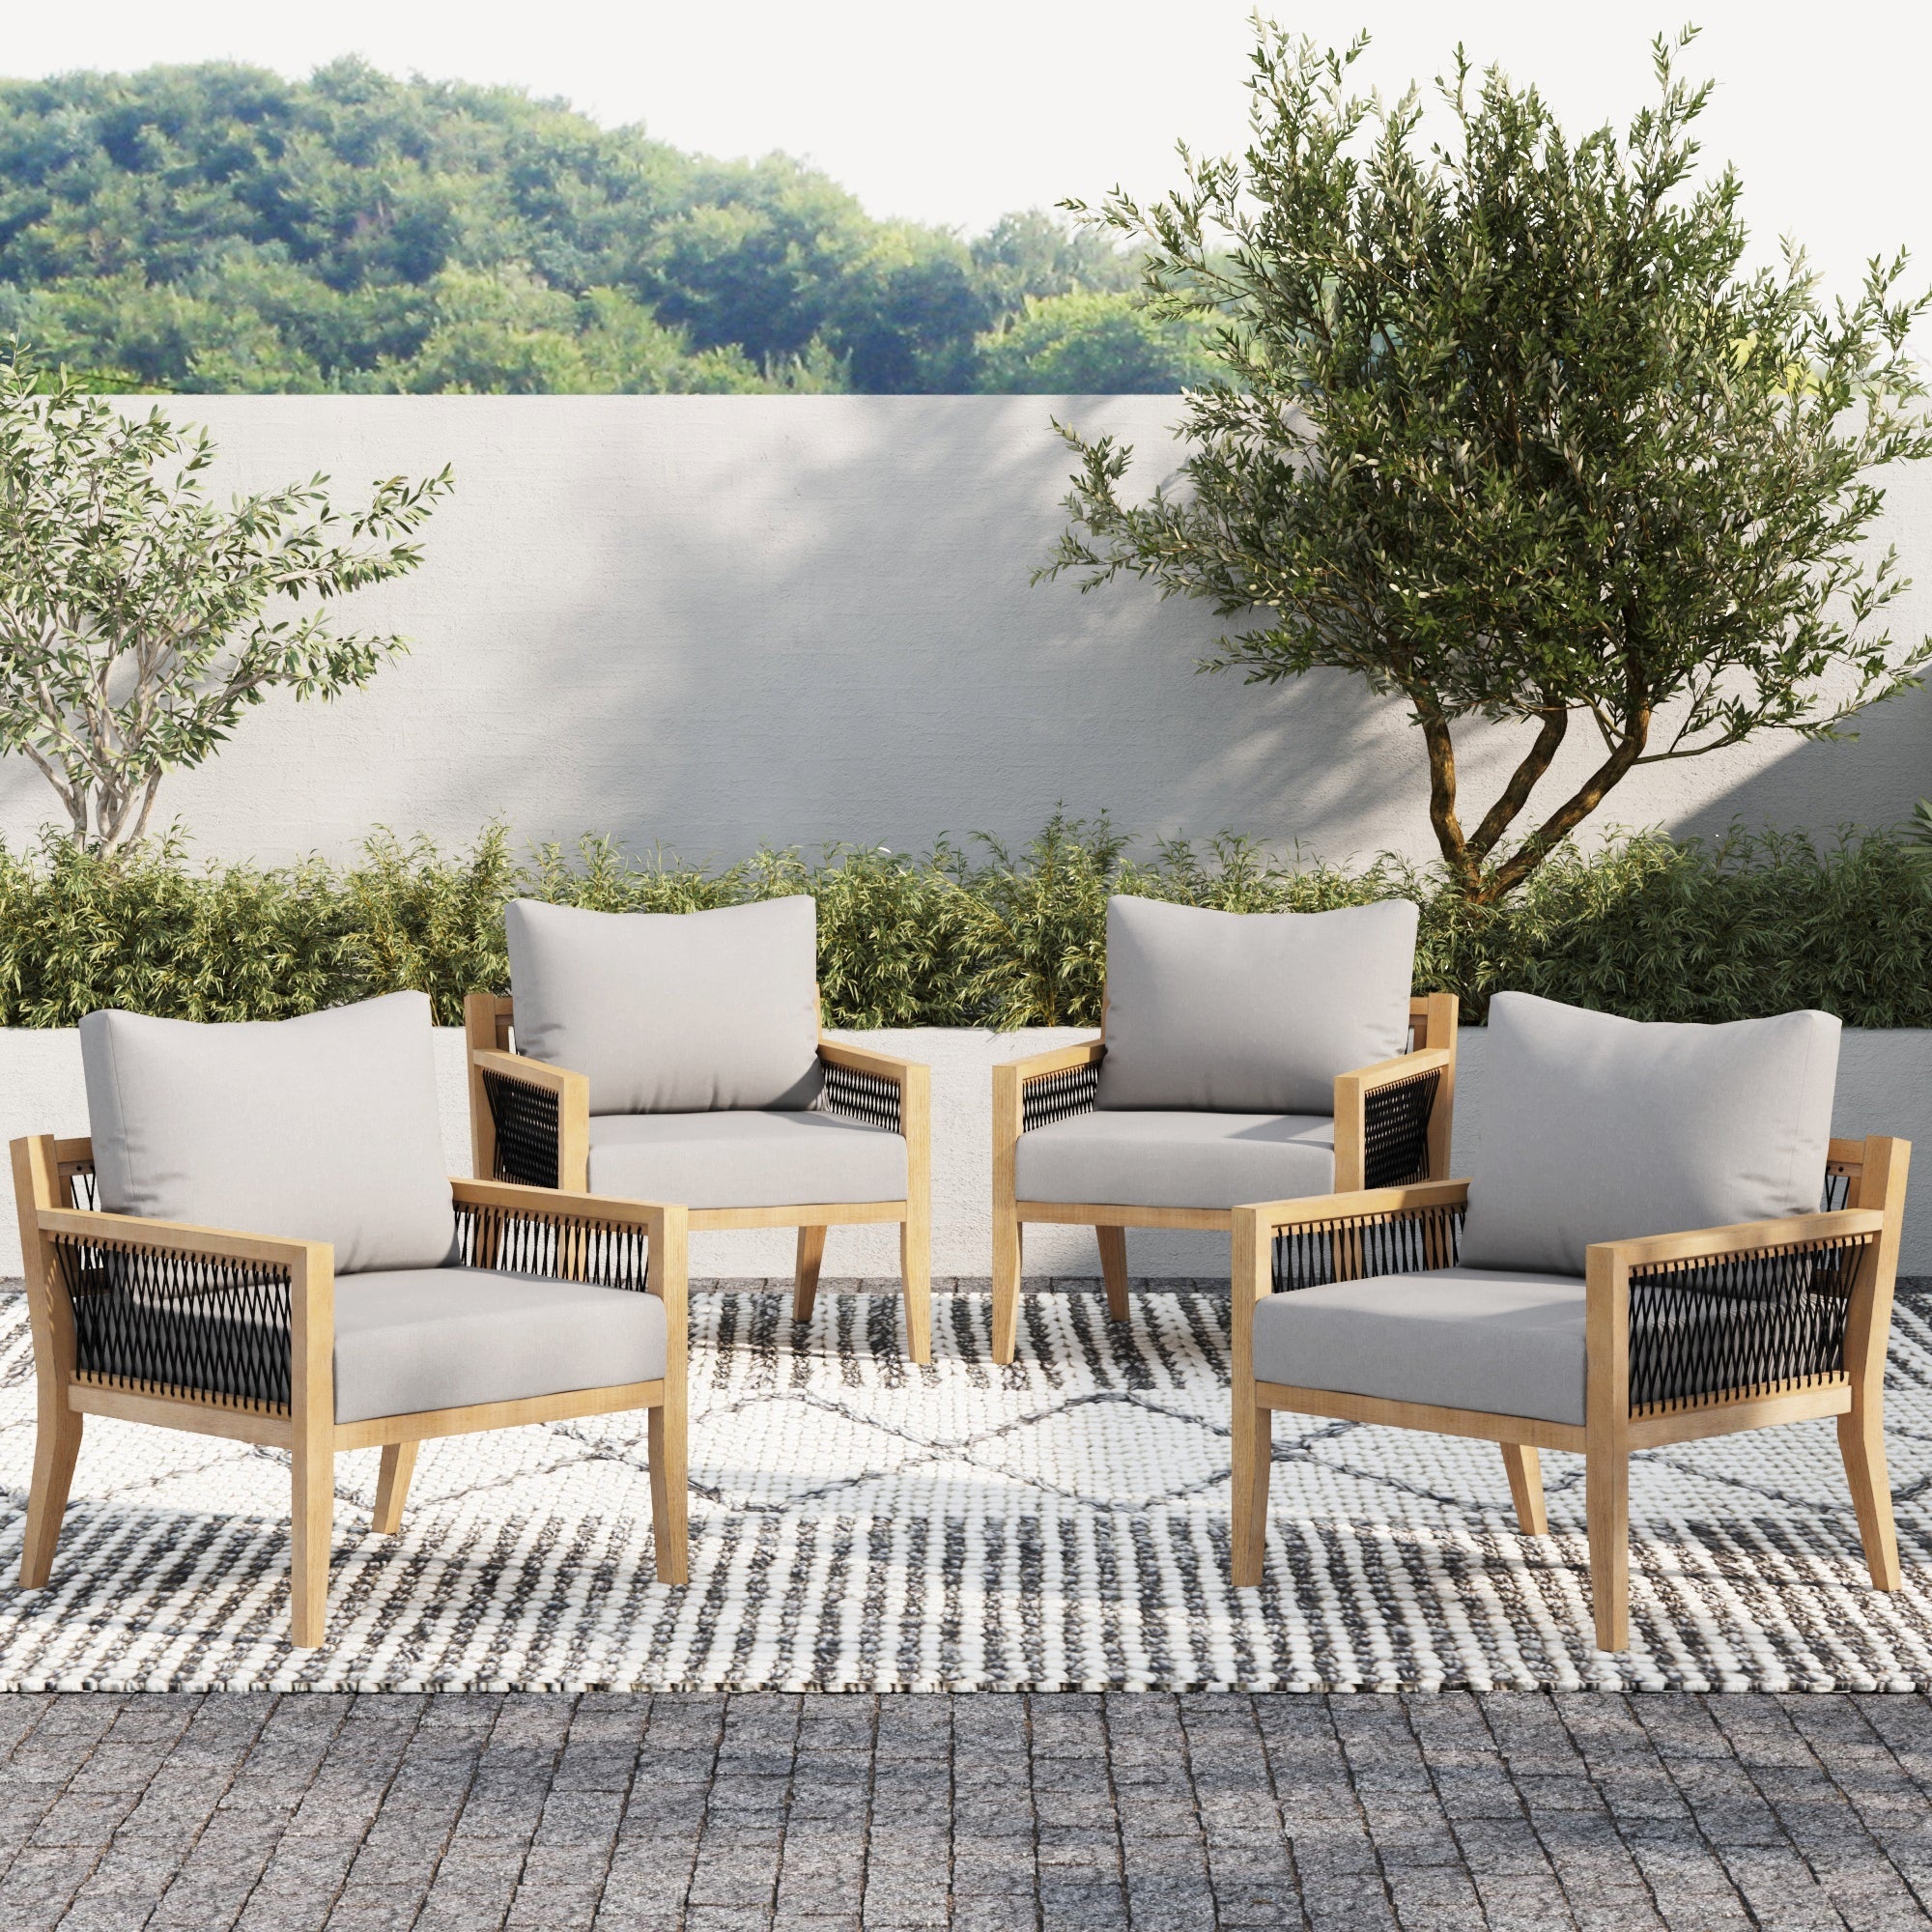 Set of 4 Outdoor Wood Cushioned Patio Chairs